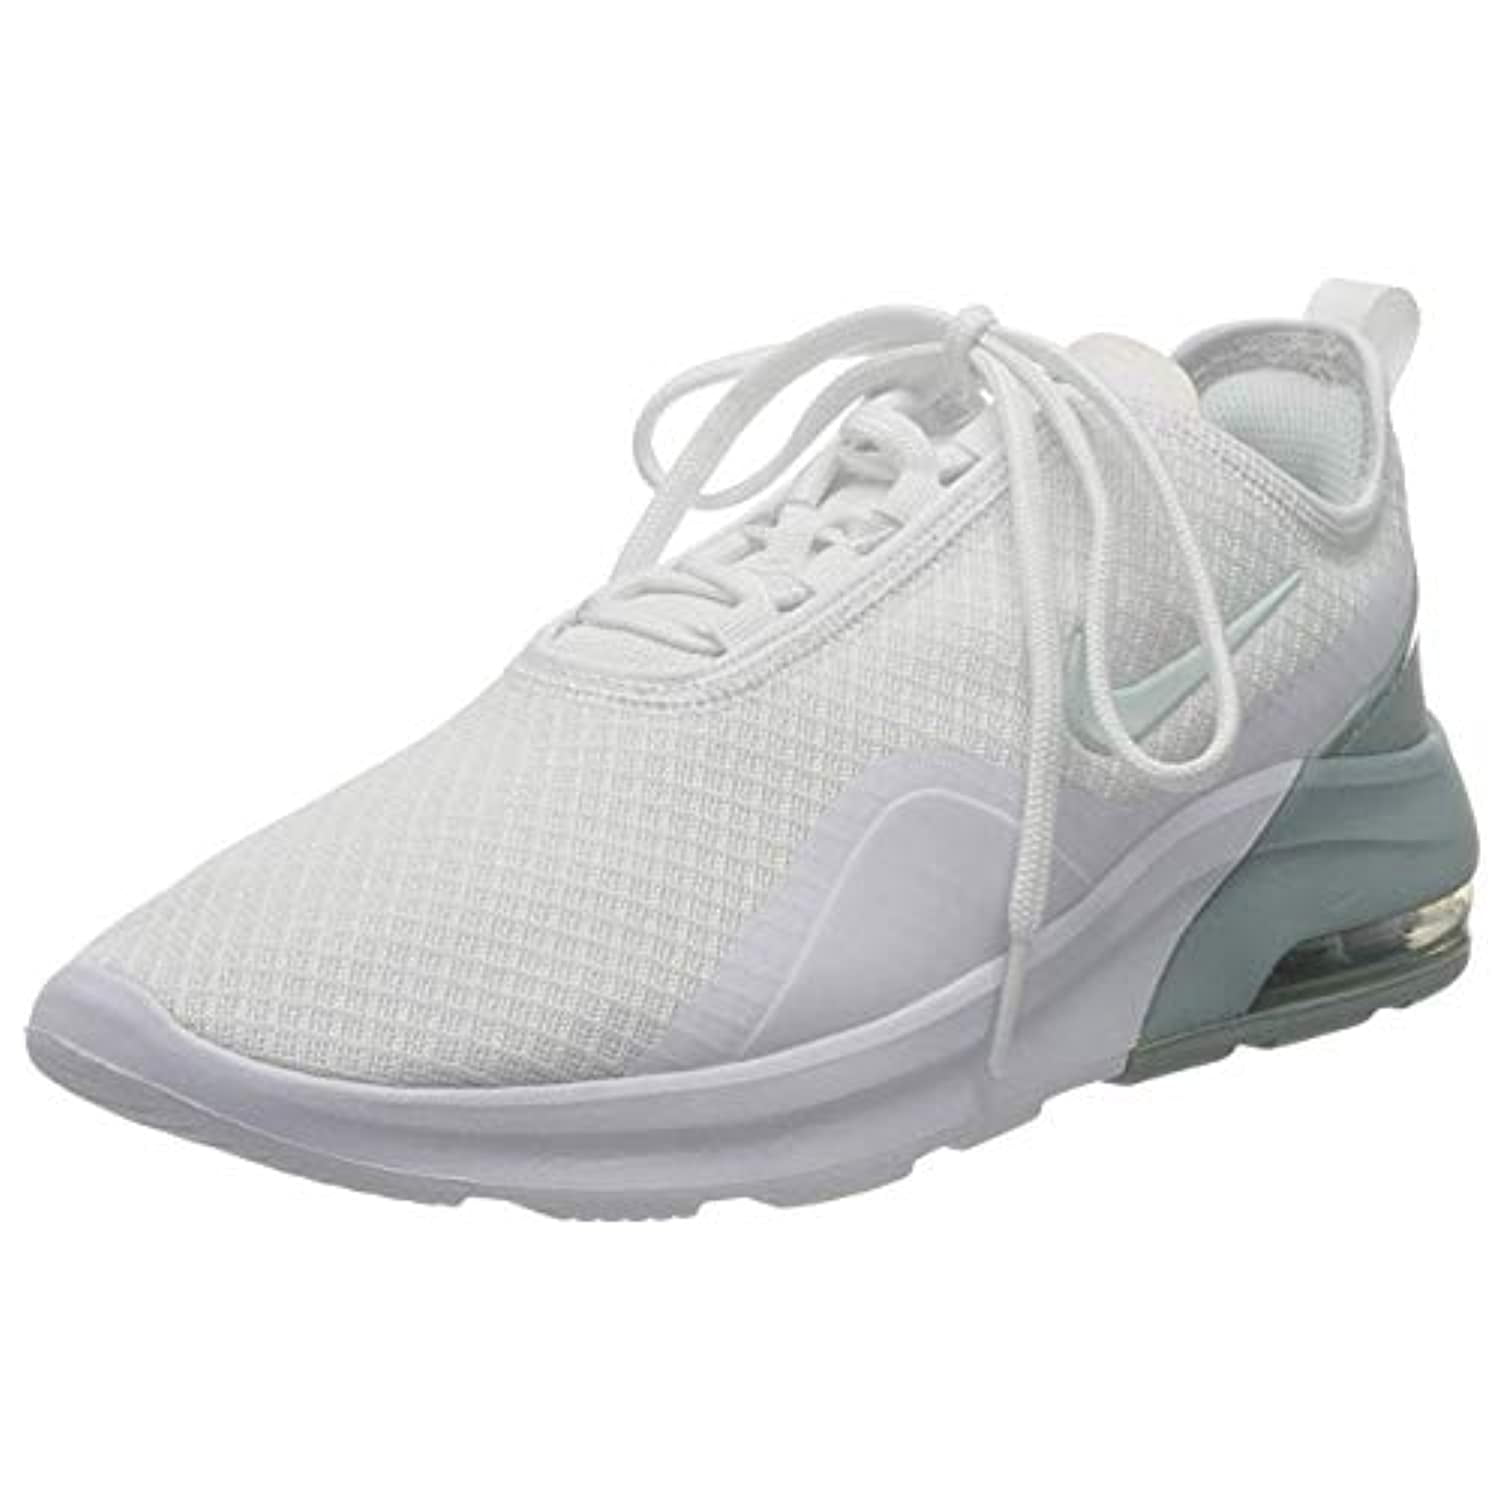 nike air max motion 2 women's sneakers white